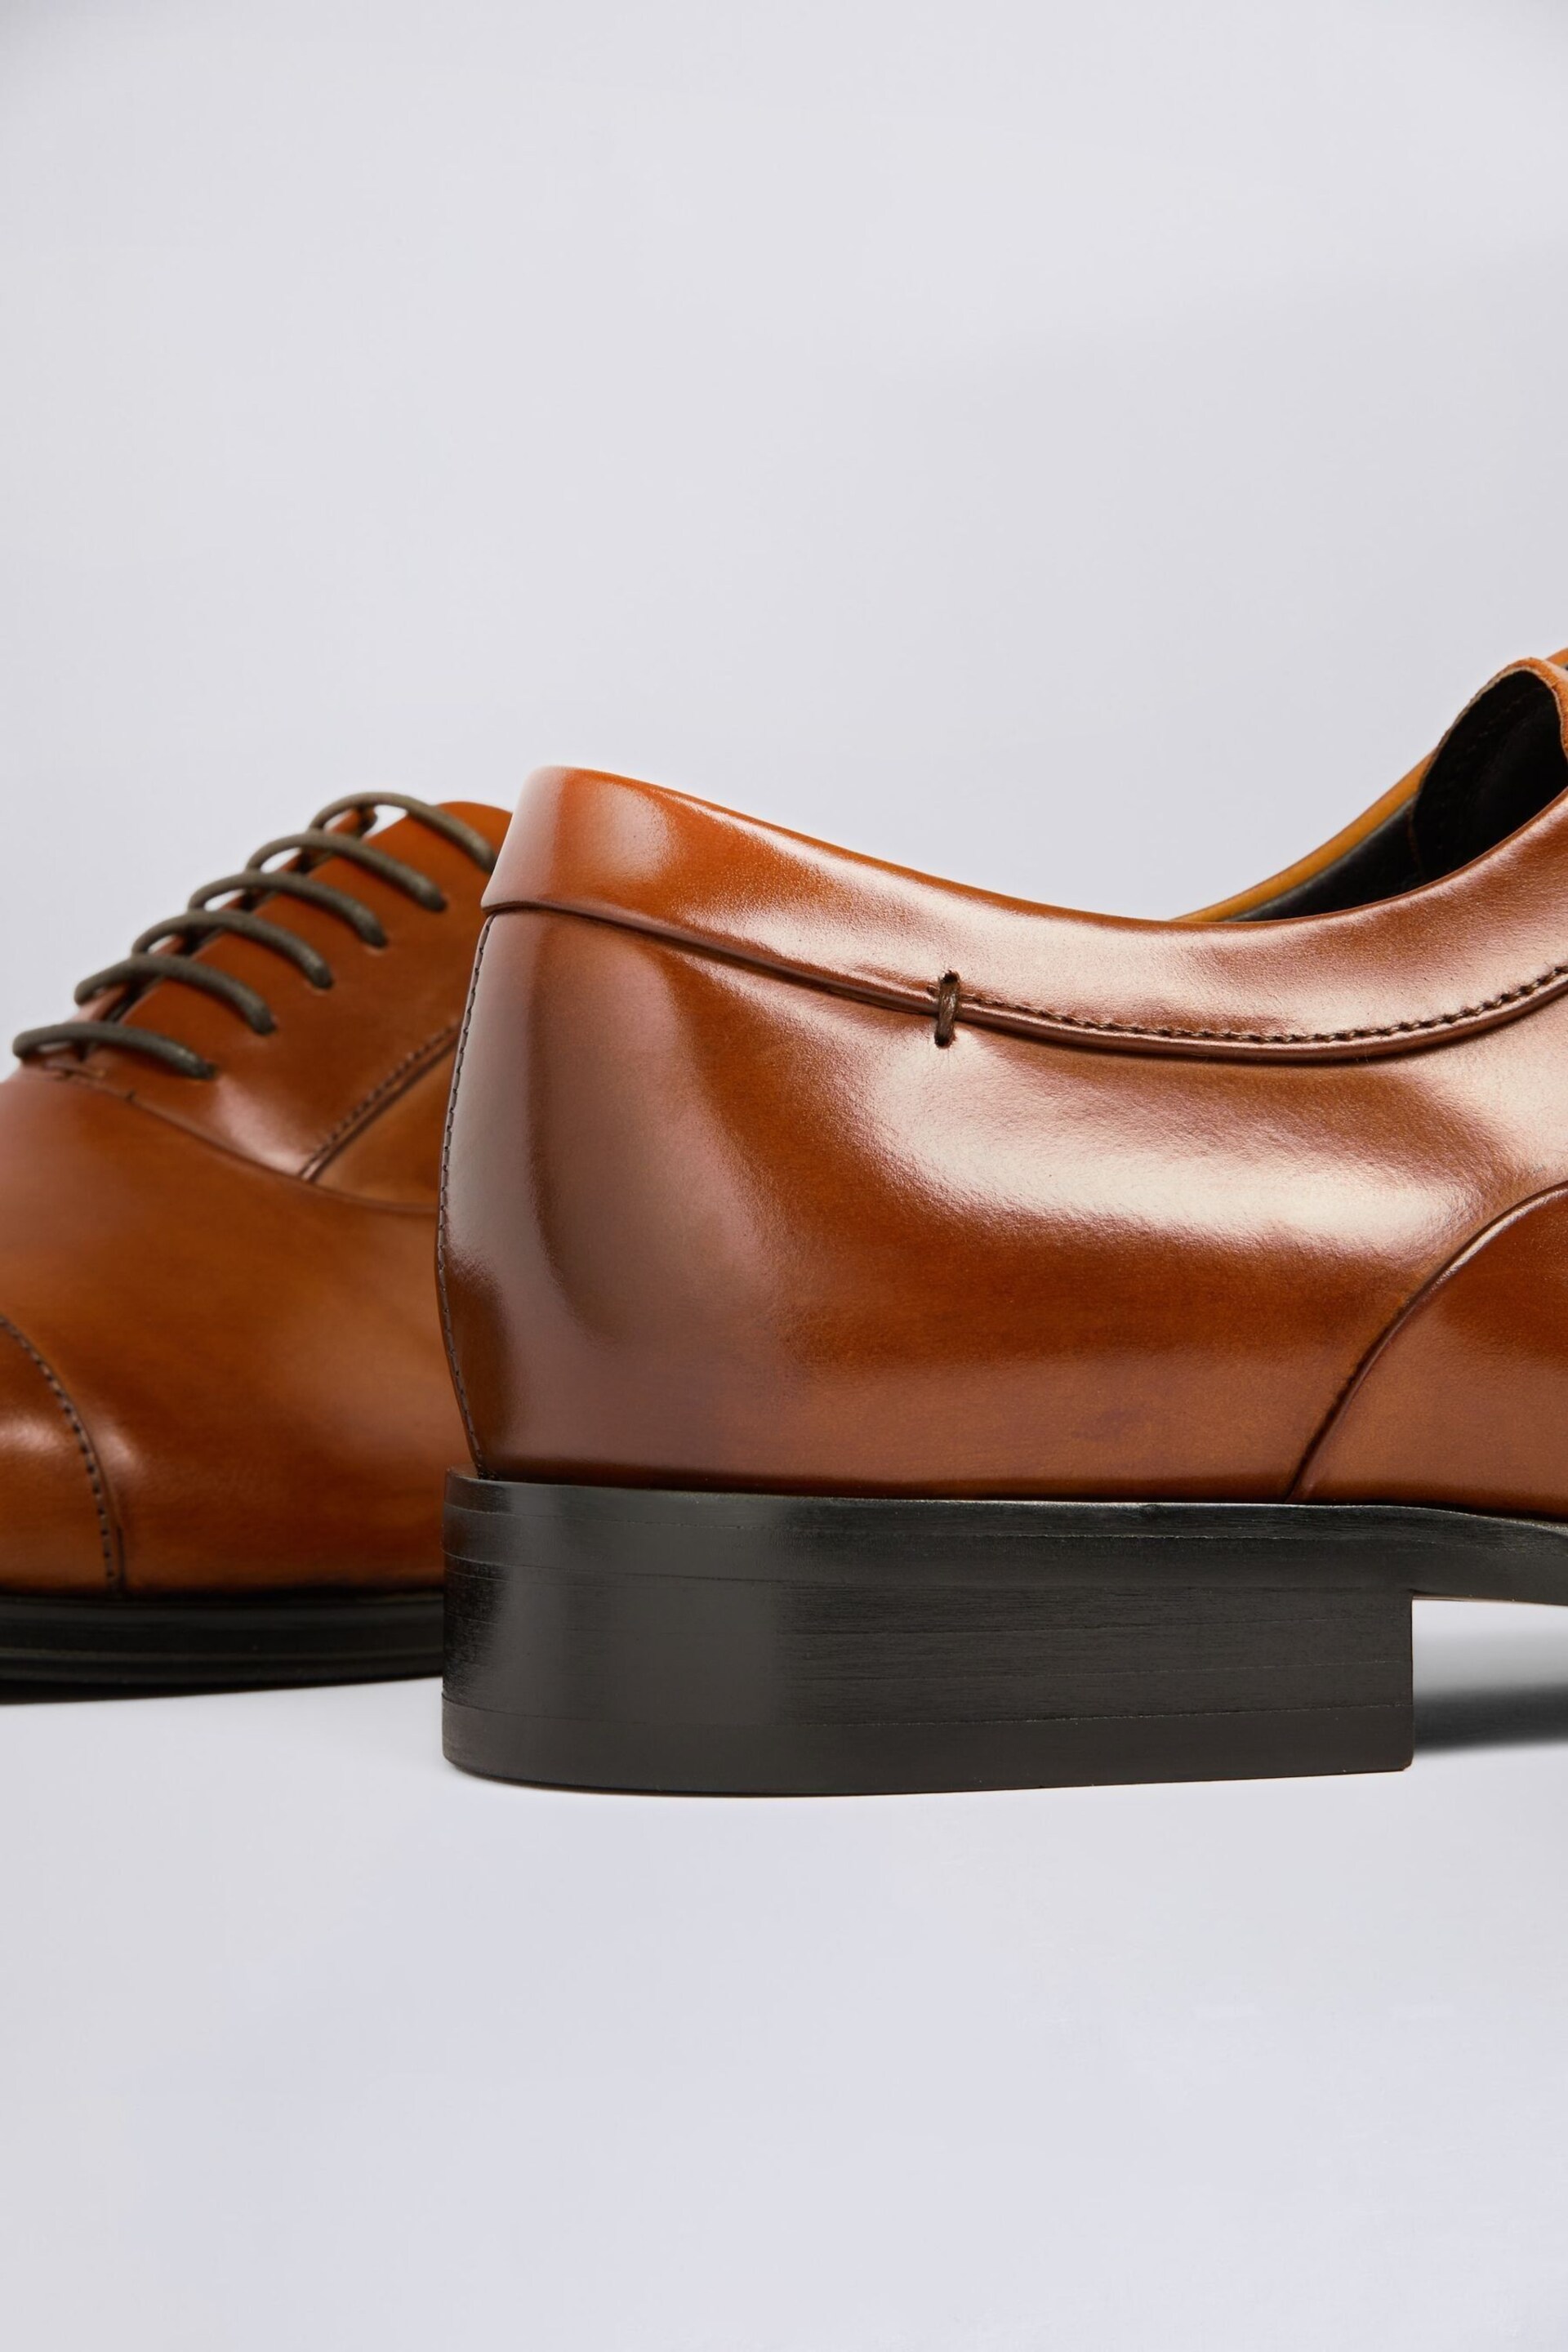 MOSS Tan John Guildhall Oxford Shoes - Image 4 of 5